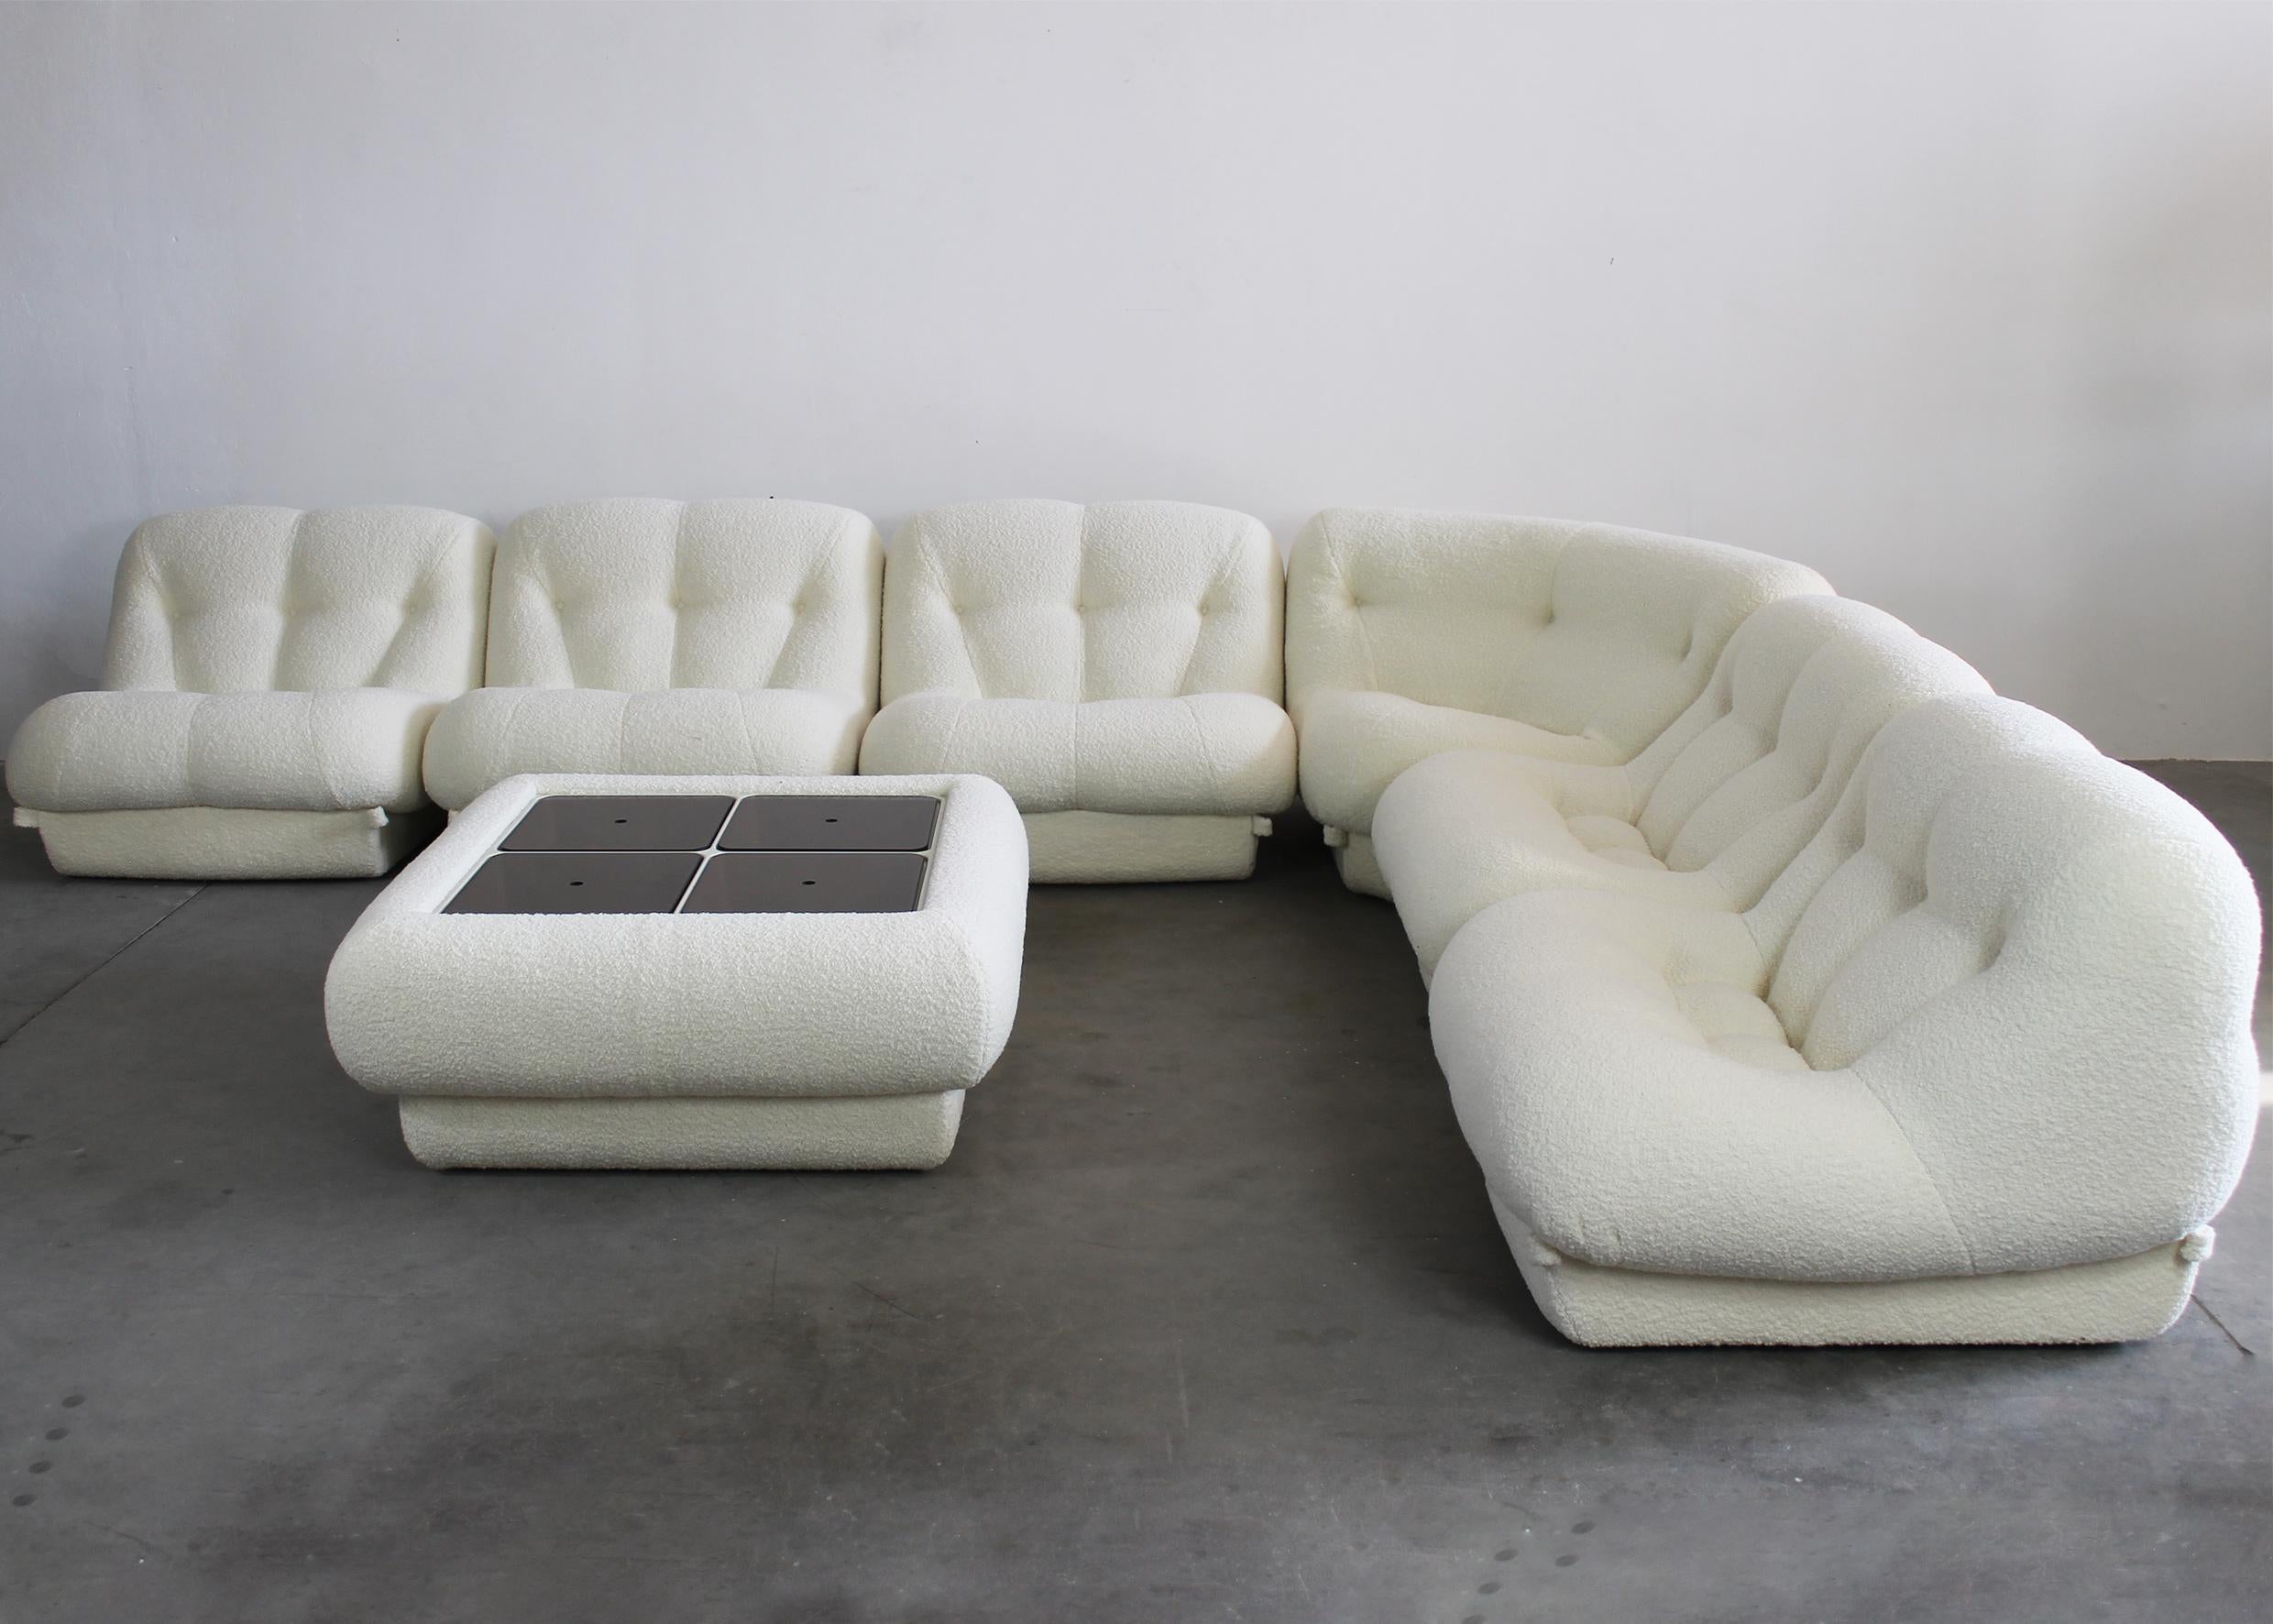 Mid-Century Modern Rino Maturi Nuvolone Living Room Set in White Boucle by MIMO Padova 1970s Italy For Sale